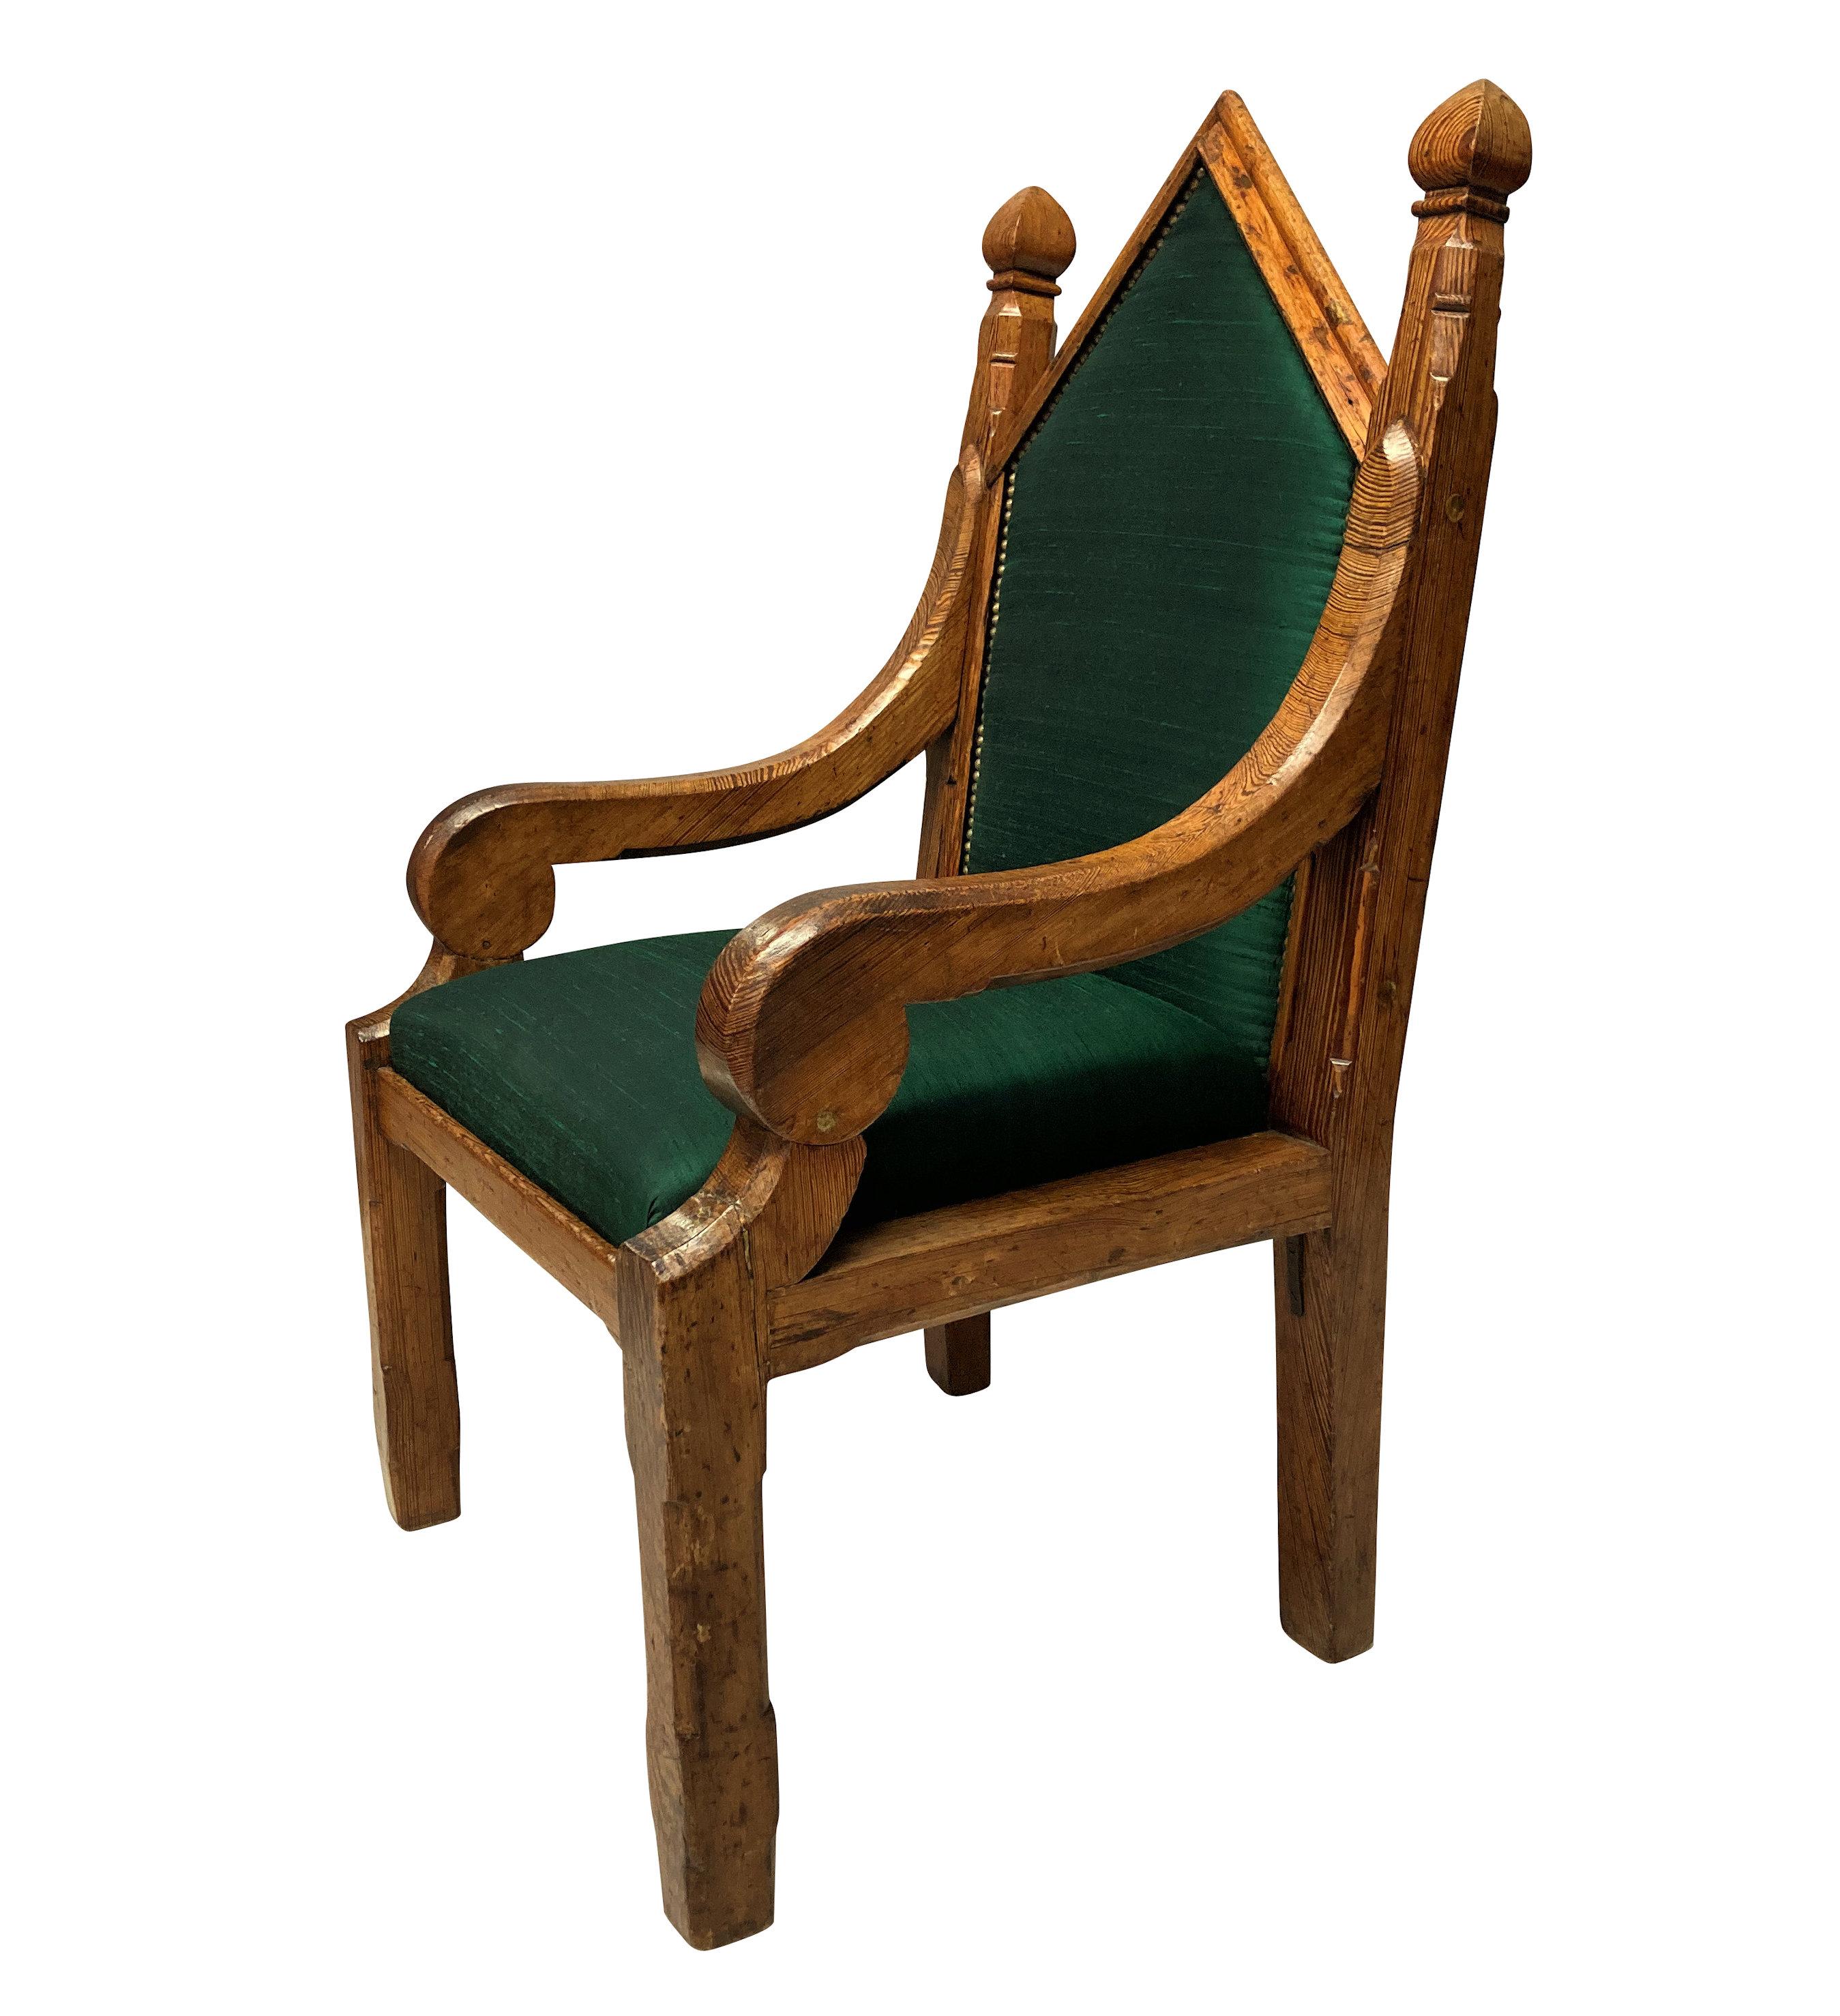 An English Gothic armchair of simple design, in pine and newly upholstered in emerald textured silk.